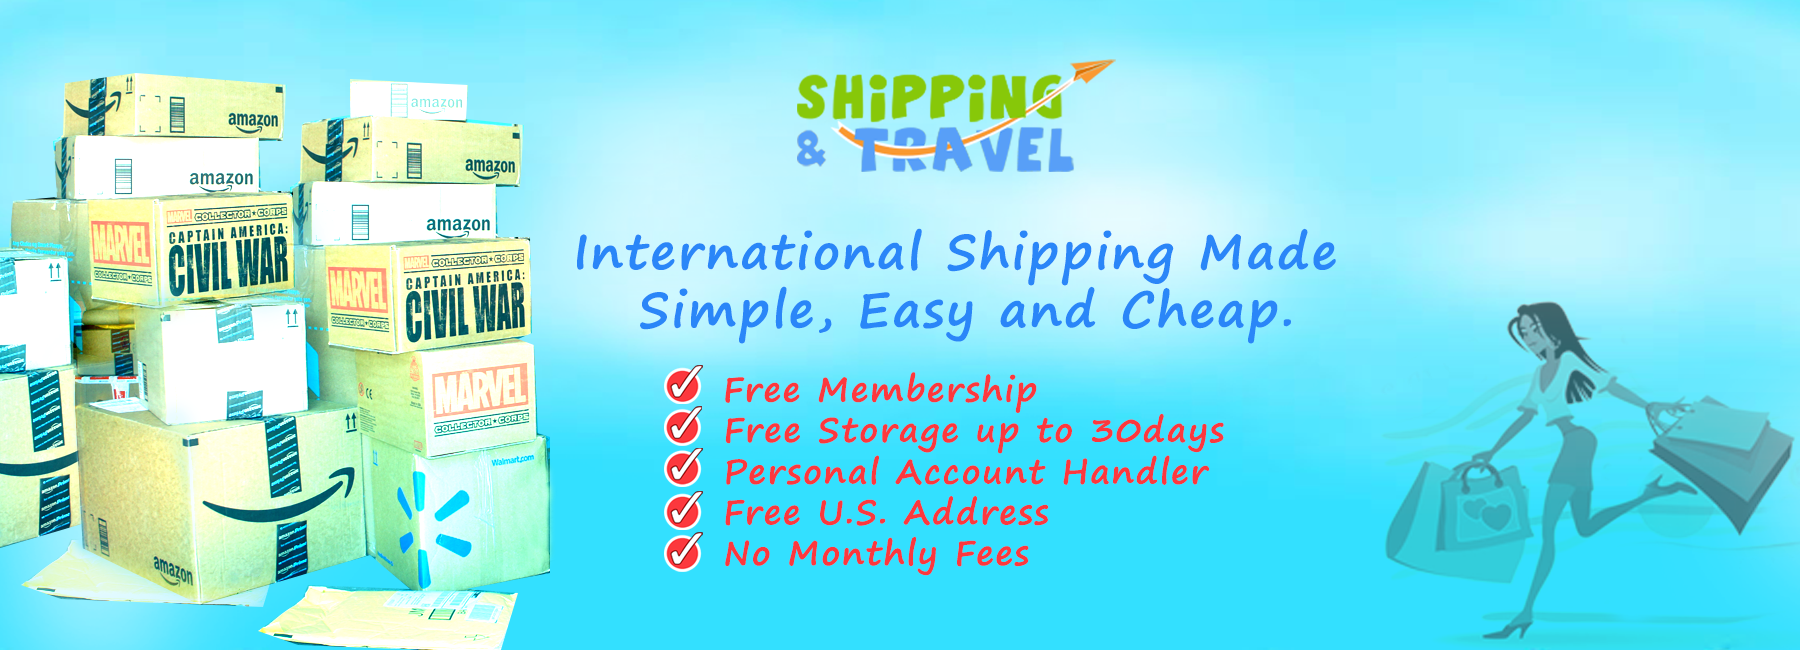 Shipping and Travel Banner